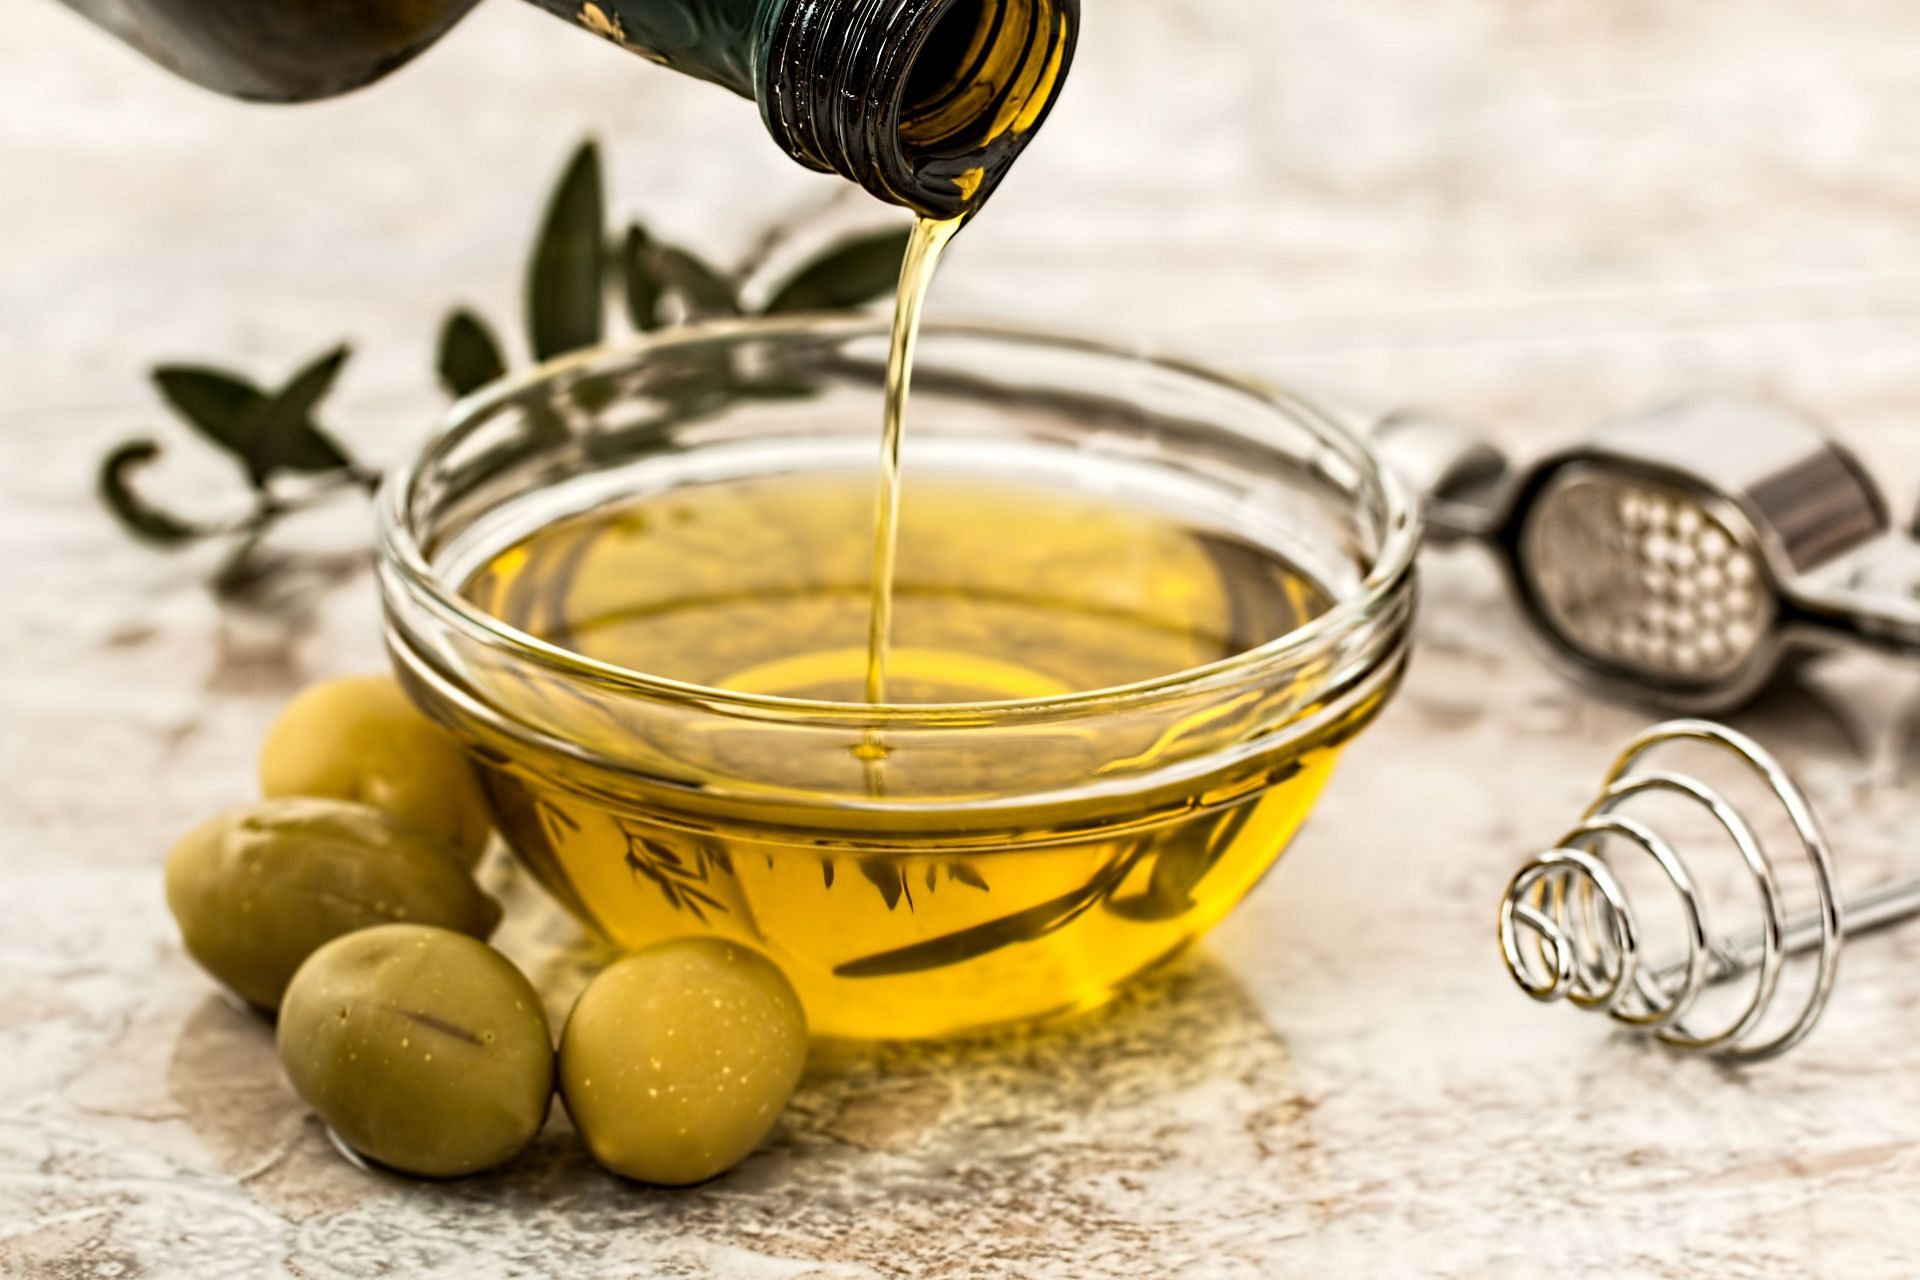 Jojoba oil is a natural, versatile oil that has been used for centuries for its numerous health and beauty benefits (Image via pexels)